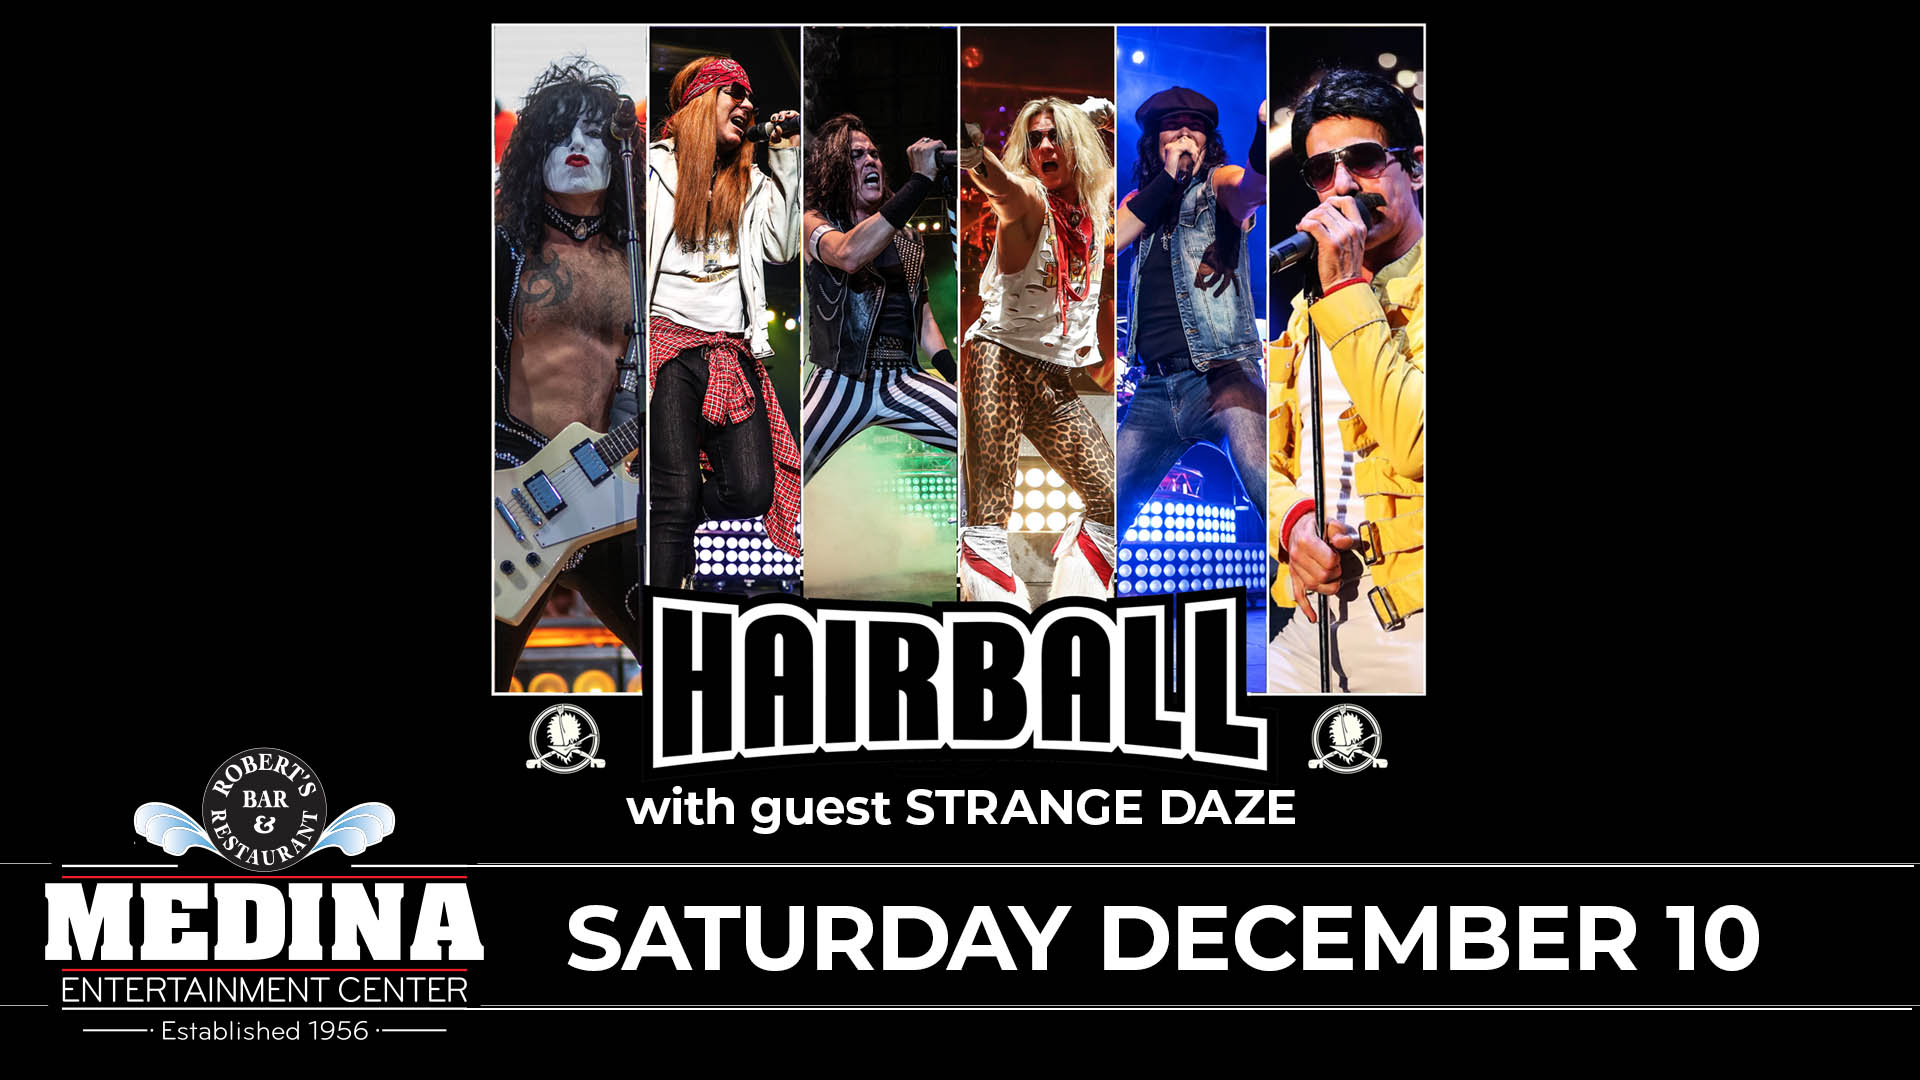 HAIRBALL with guest STRANGE DAZE Medina Entertainment Center Saturday, December 10, 2022 Doors: 7:30PM | Music: 8:15PM | 21+ General Admission: $28 ADVANCE / $33 DAY OF SHOW